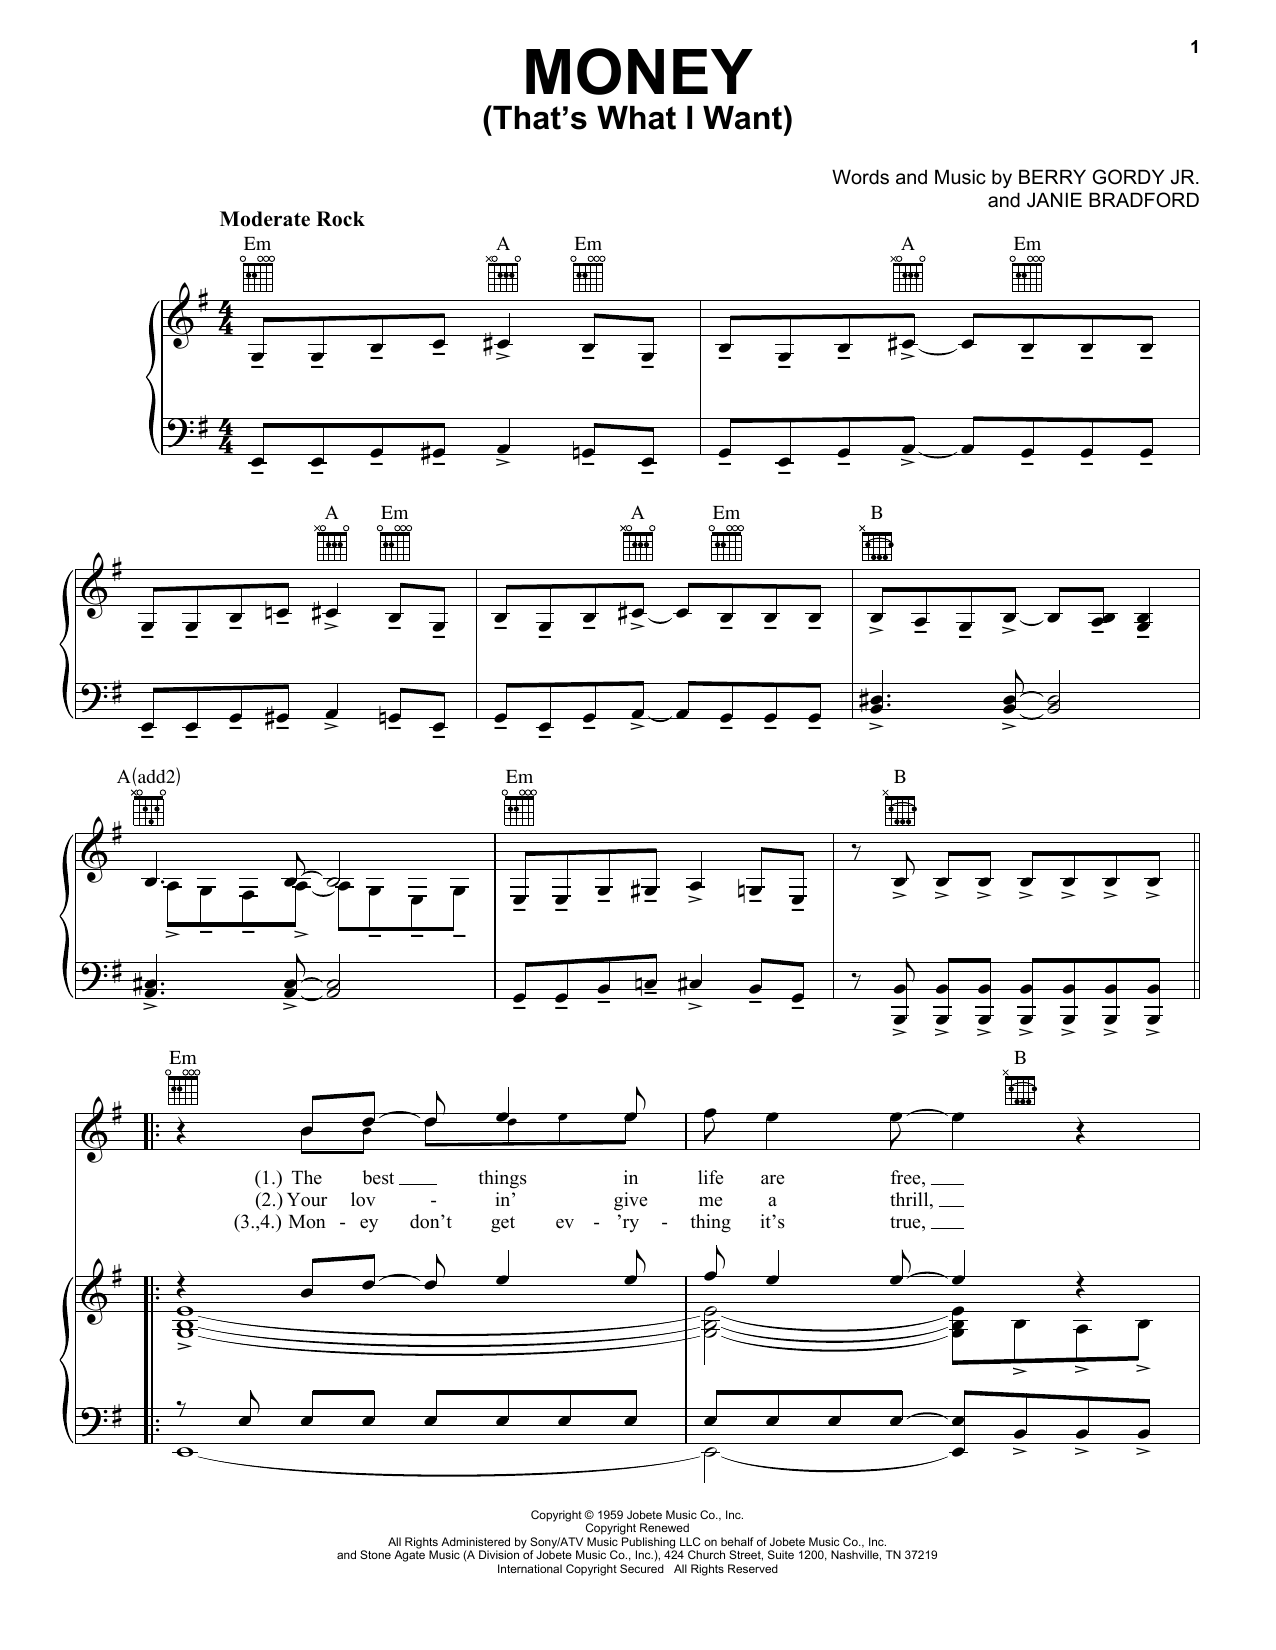 The Beatles Money (That's What I Want) sheet music notes and chords. Download Printable PDF.